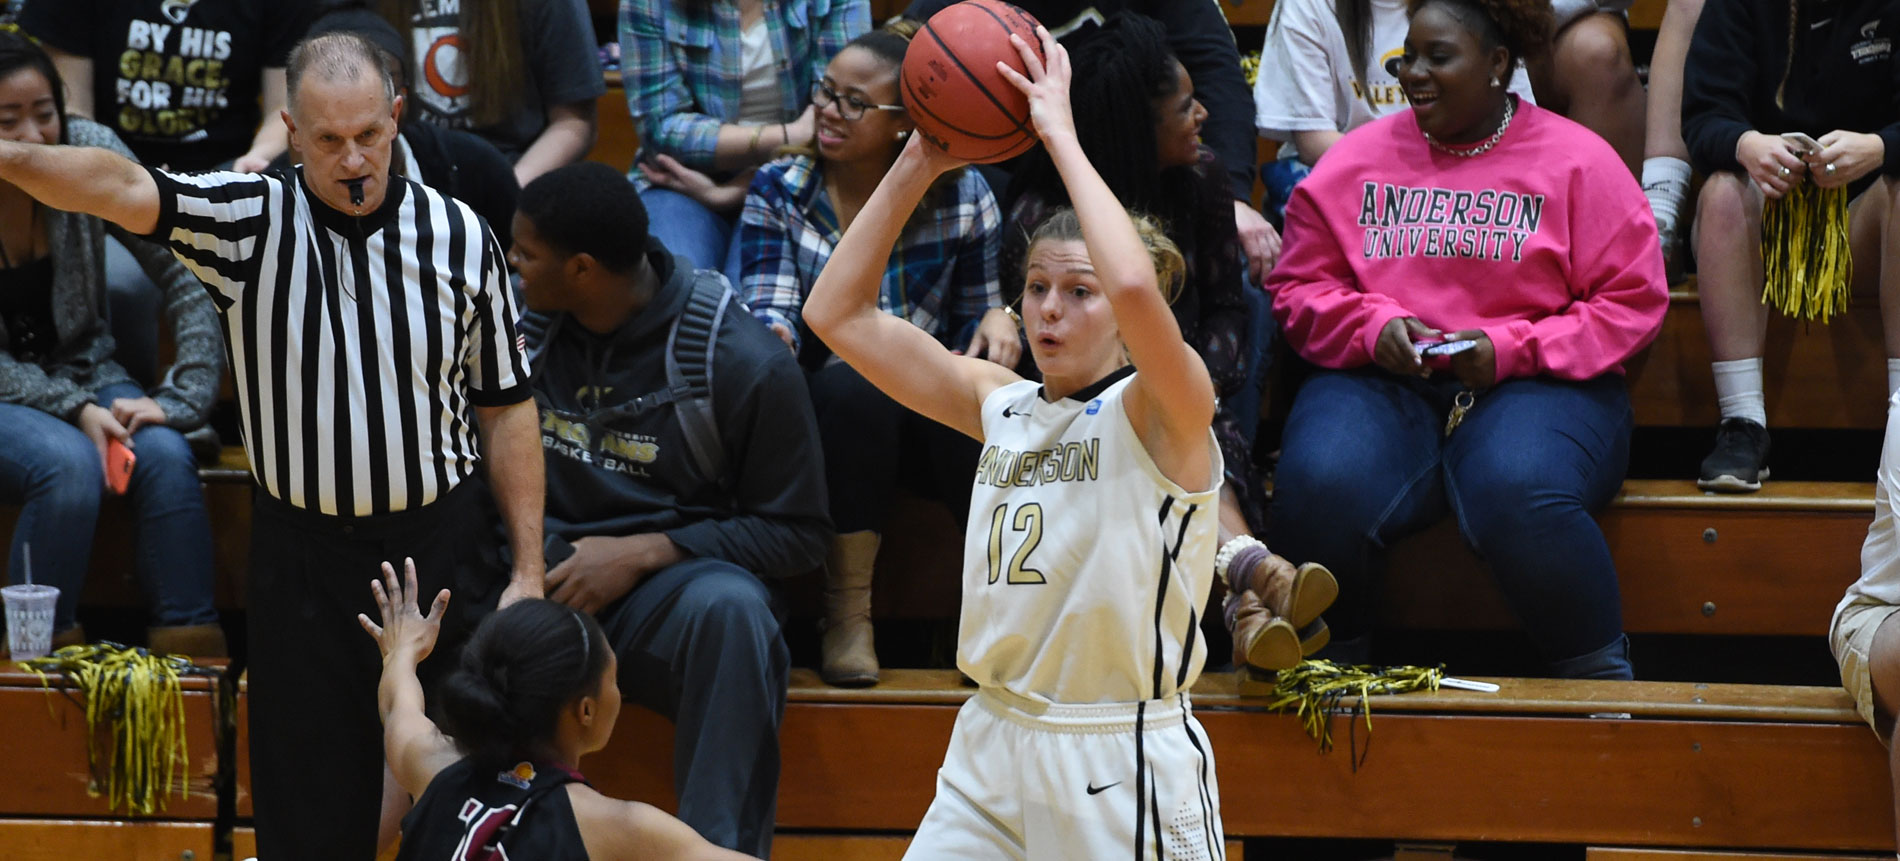 Turnovers Catch Up with Trojans at Tusculum; 65-51